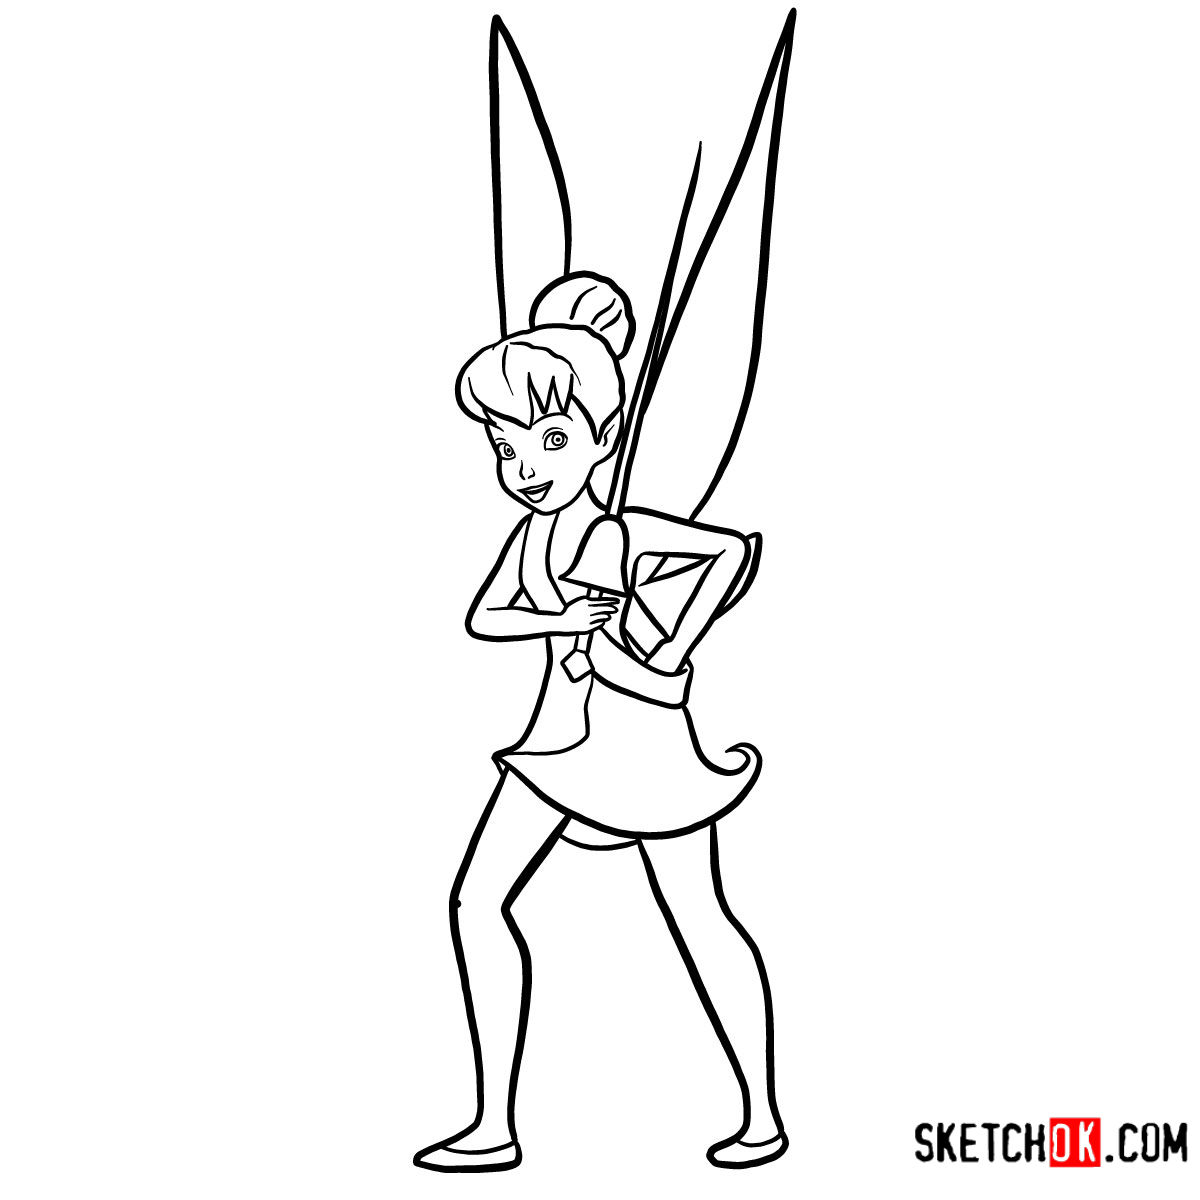 How to draw Tinker Bell the pirate | Disney Fairies